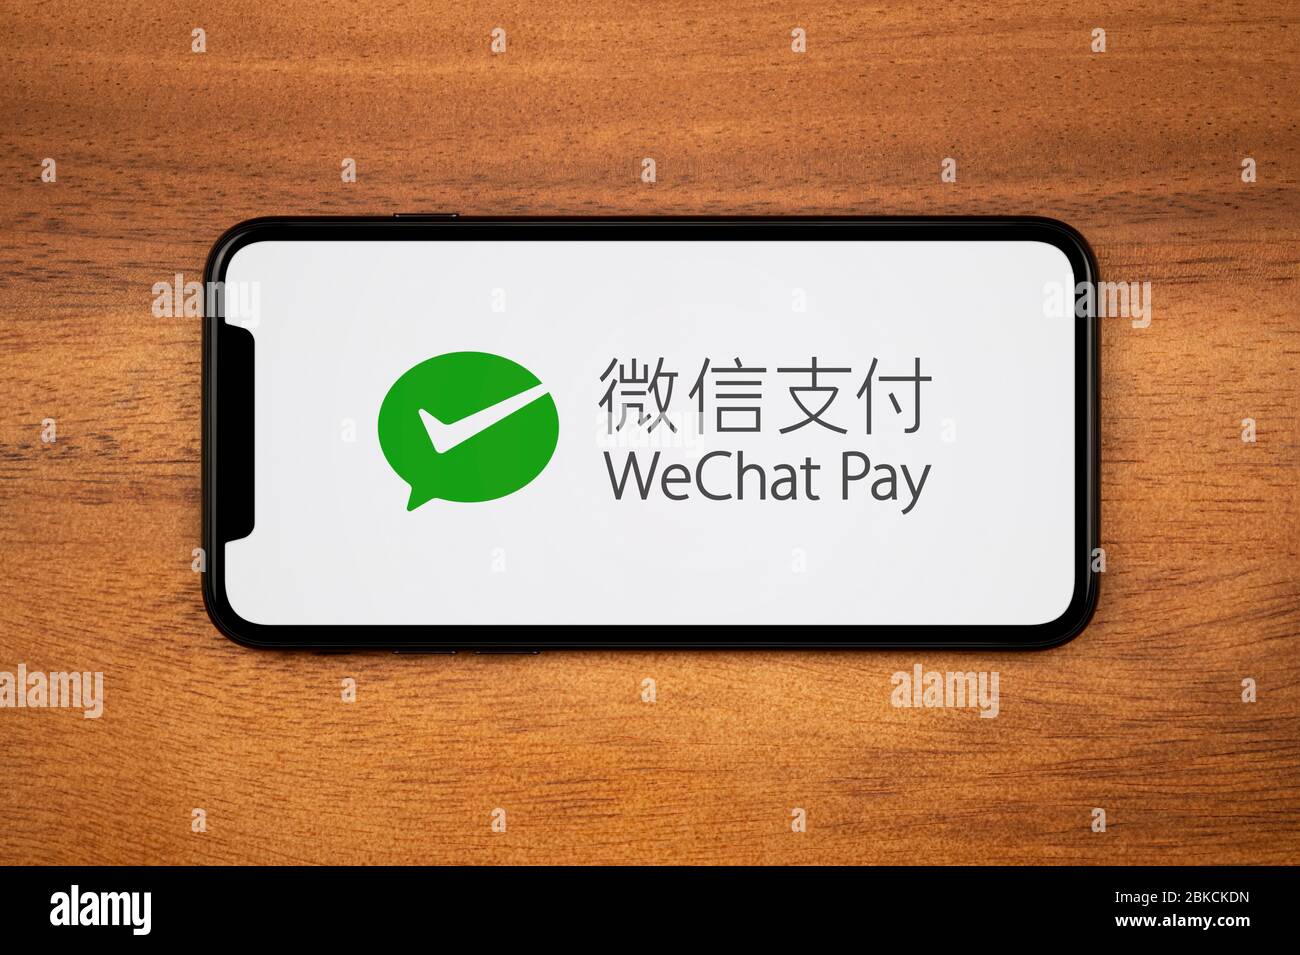 A smartphone showing the WeChat Pay logo rests on a plain wooden table (Editorial use only). Stock Photo